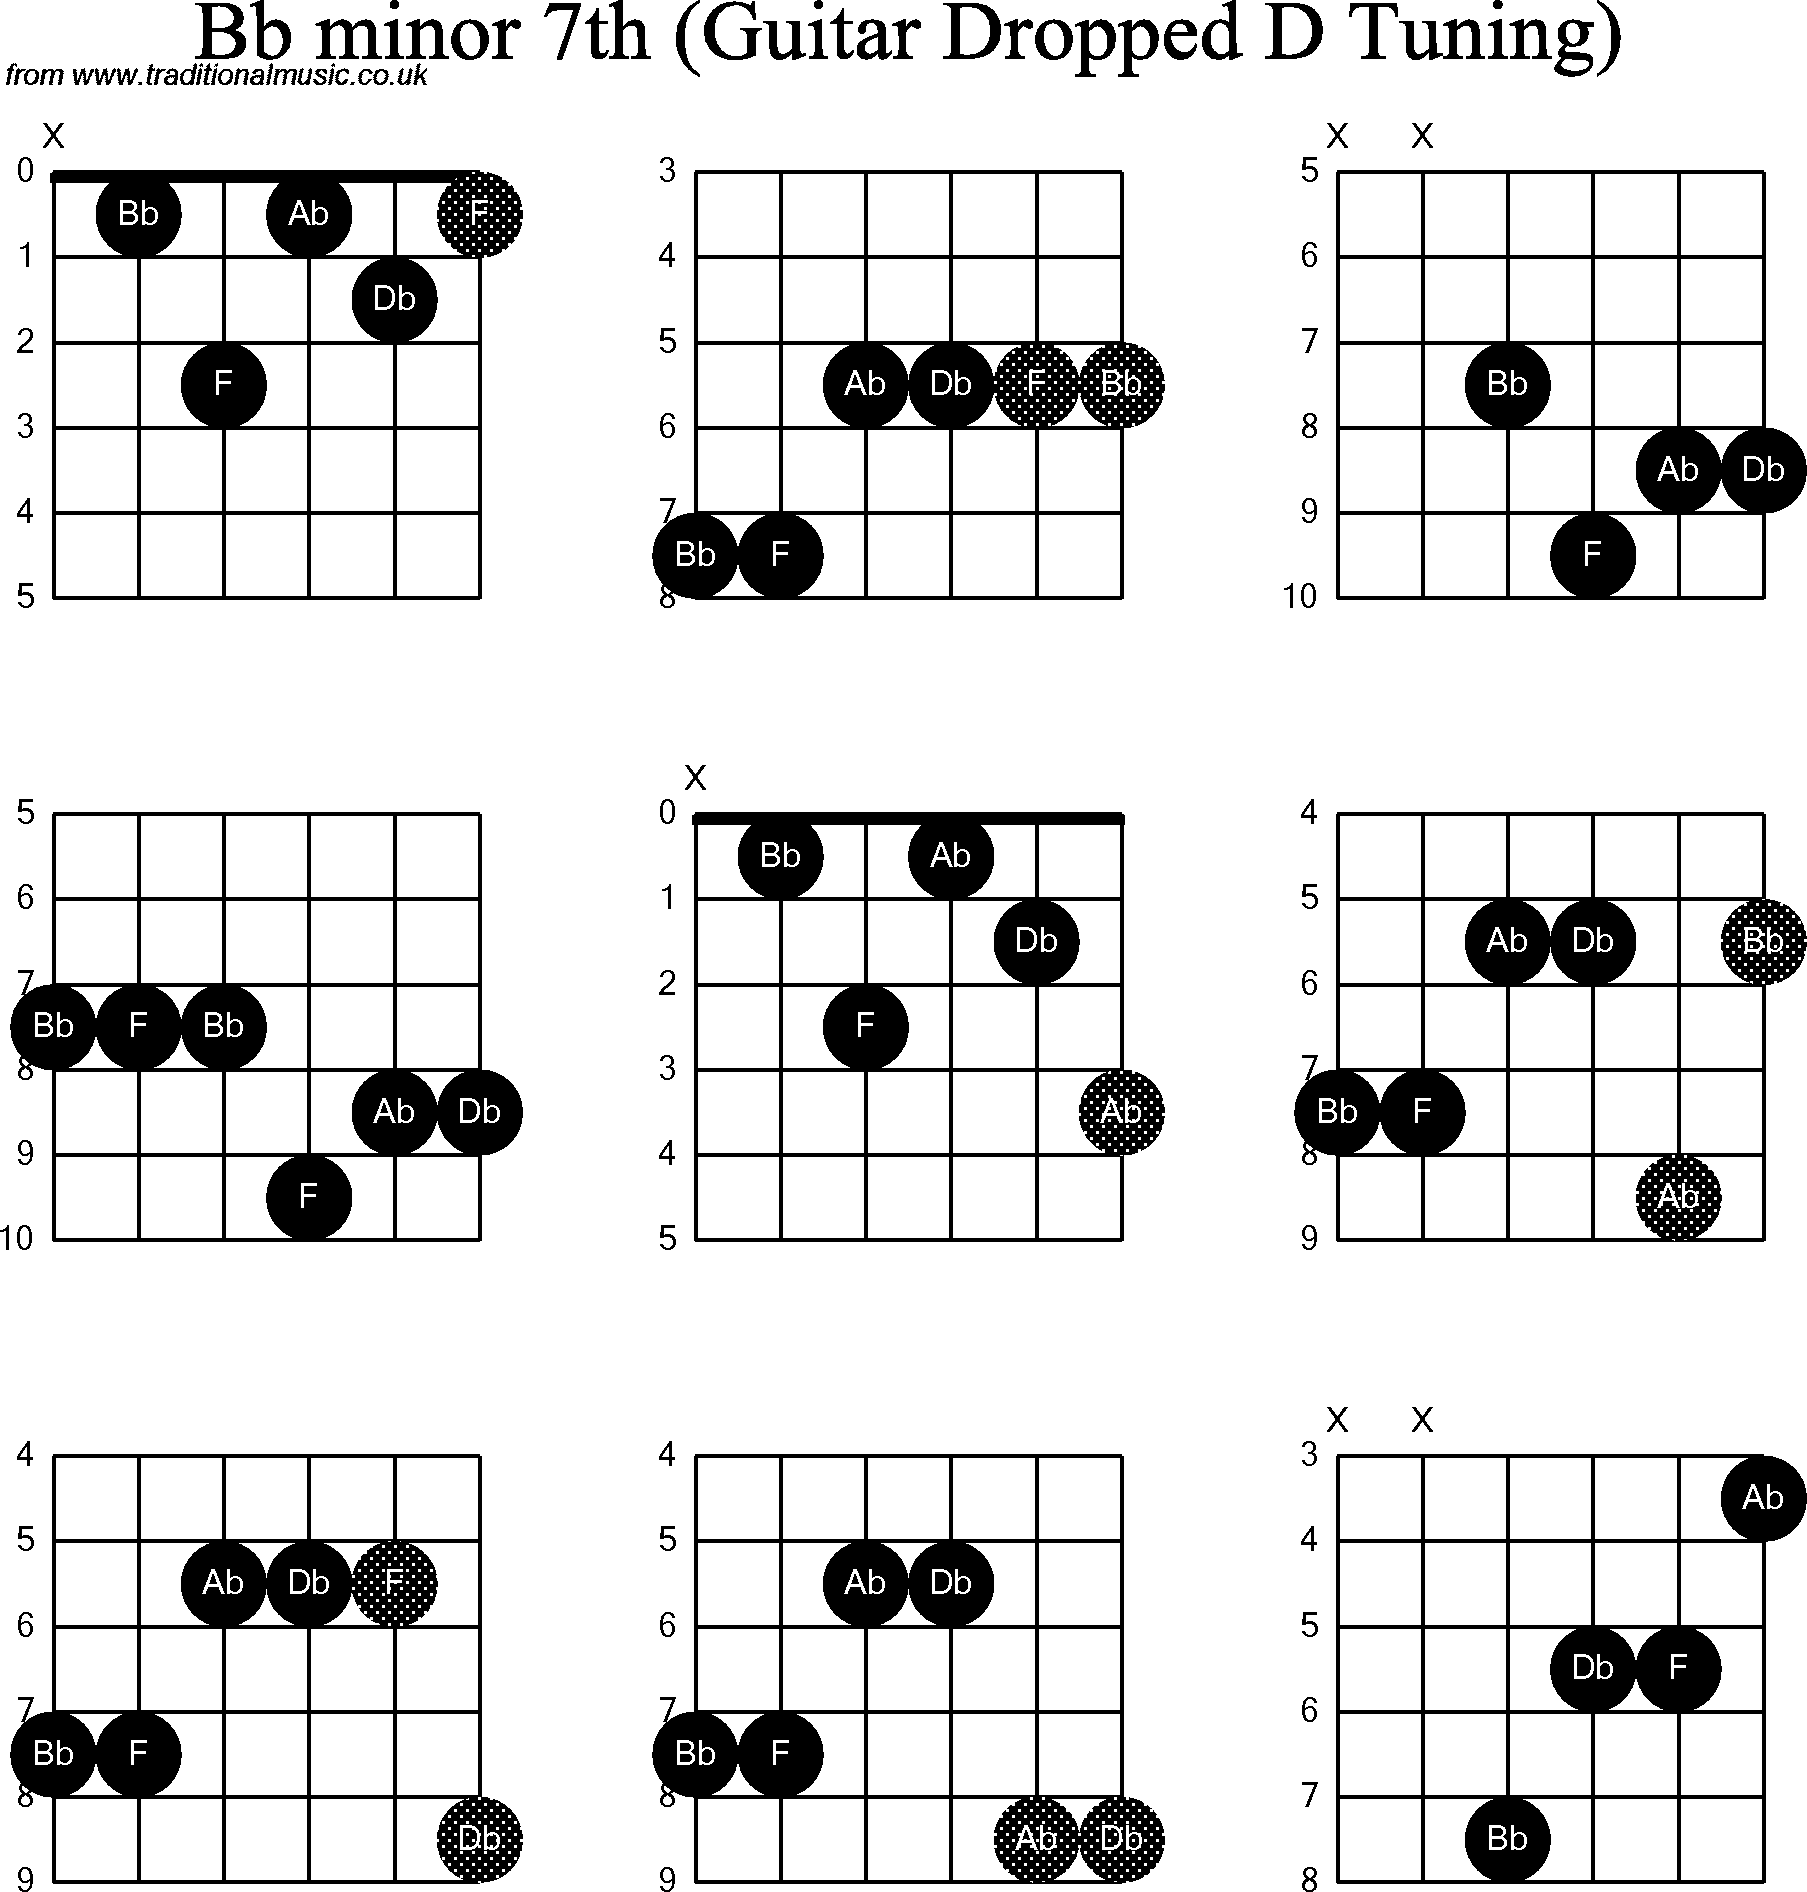 Chord diagrams for dropped D Guitar(DADGBE), Bb Minor7th